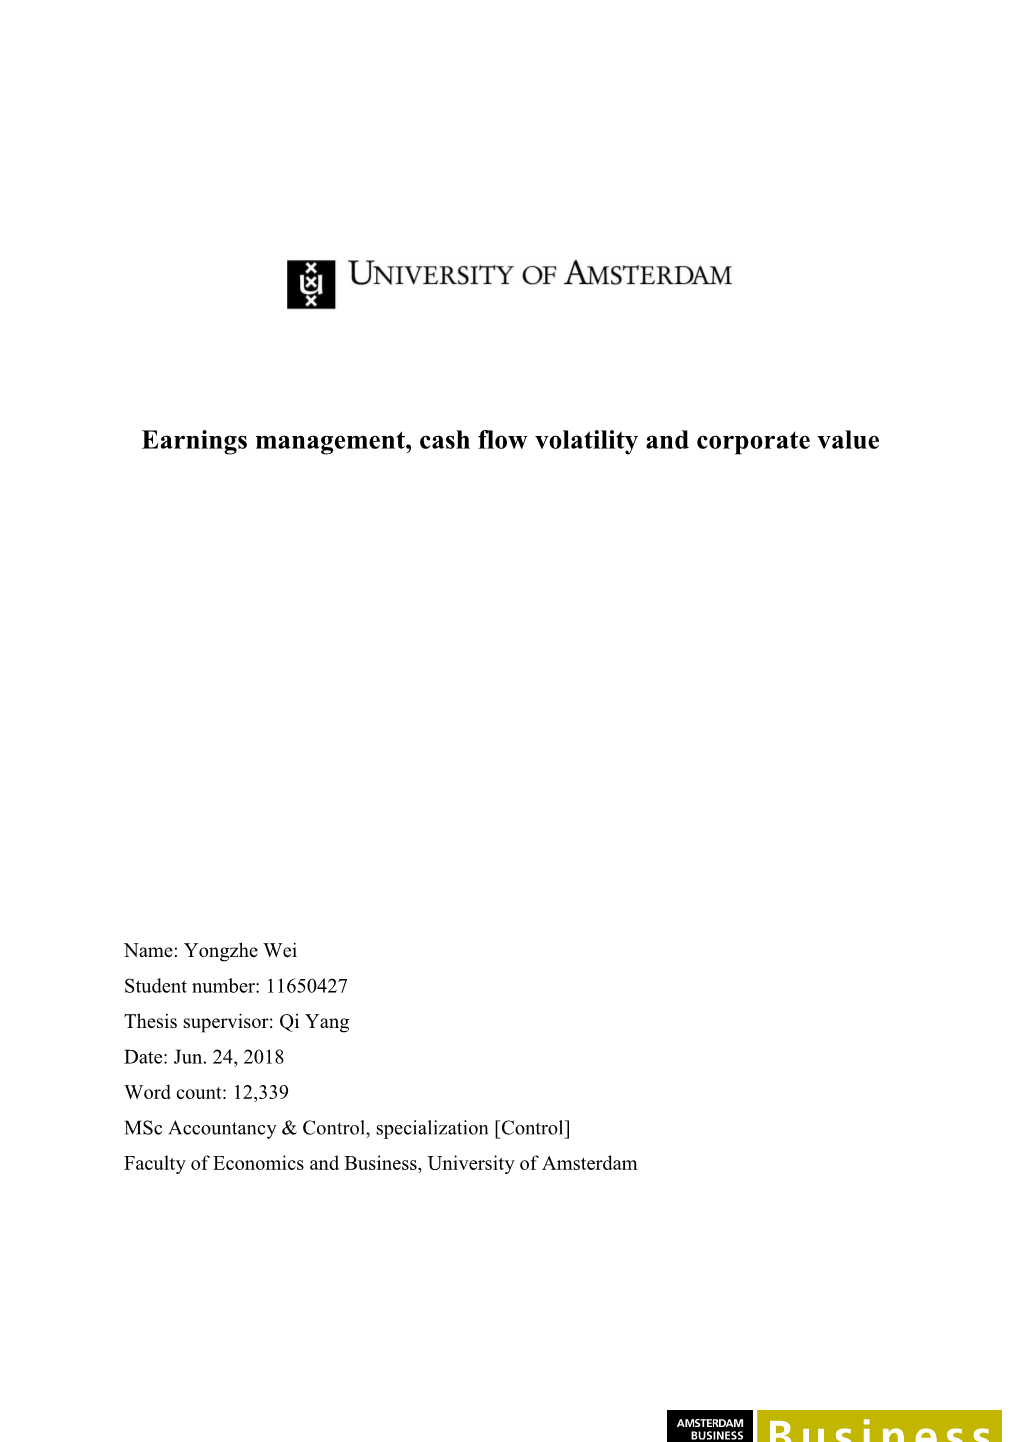 Earnings Management, Cash Flow Volatility and Corporate Value